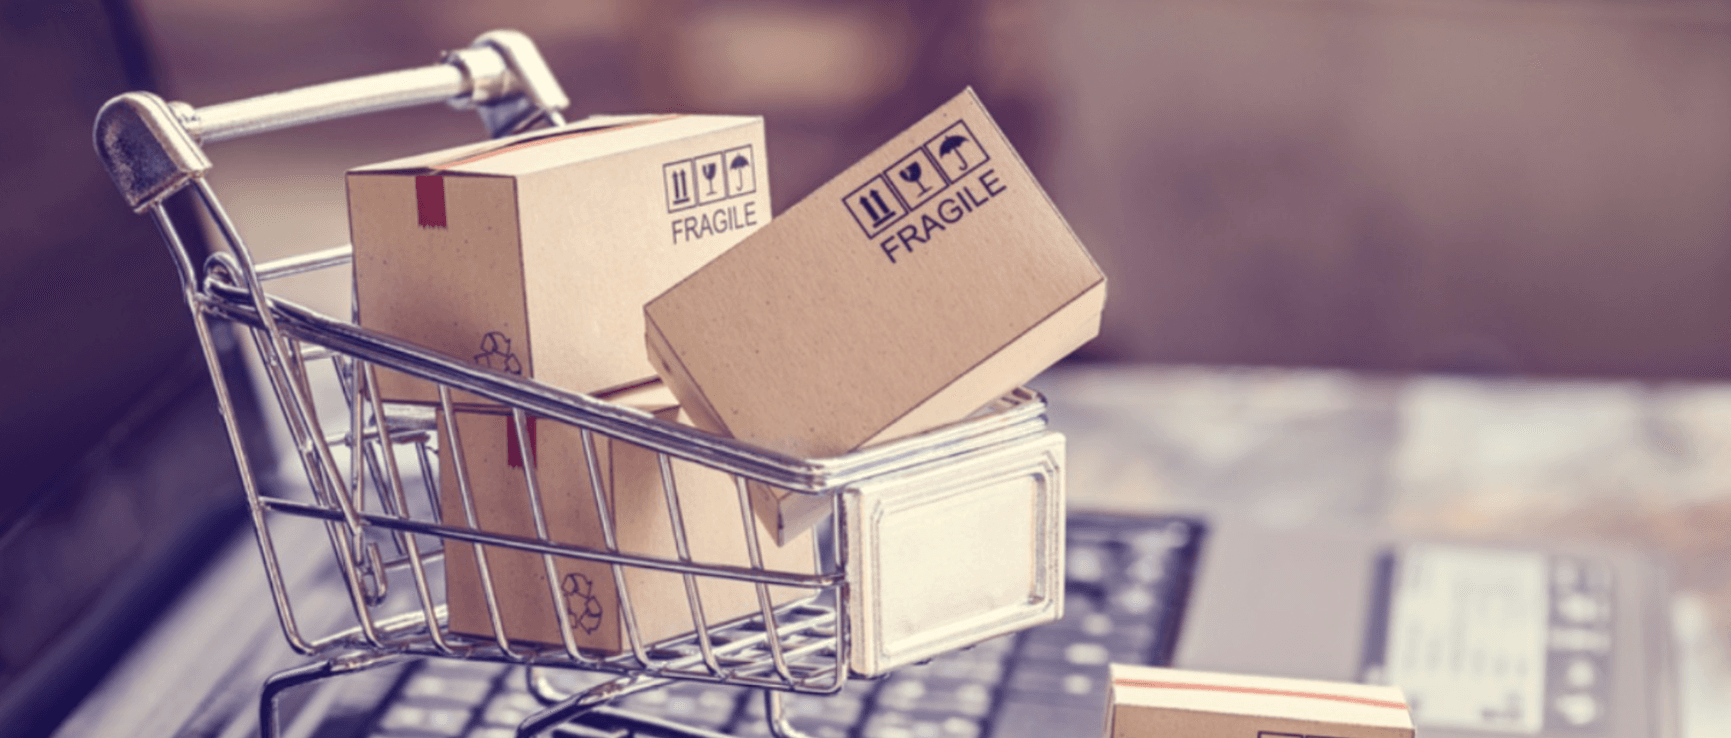 Wanna Pay Less &amp; Shop More? Try These 5 Online Shopping Hacks To Reduce Your Cart Value